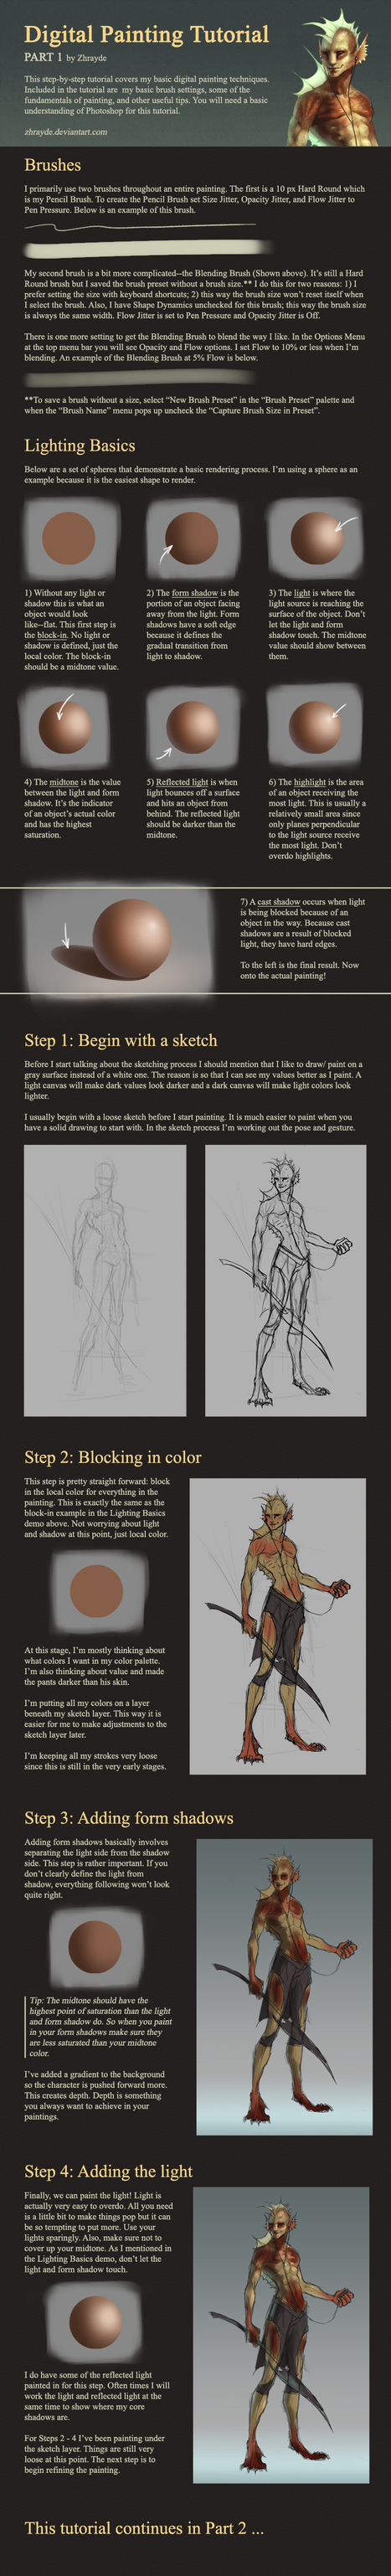 Digital Painting Tutorial - Part 1 | Drawing References and Resources | Scoop.it